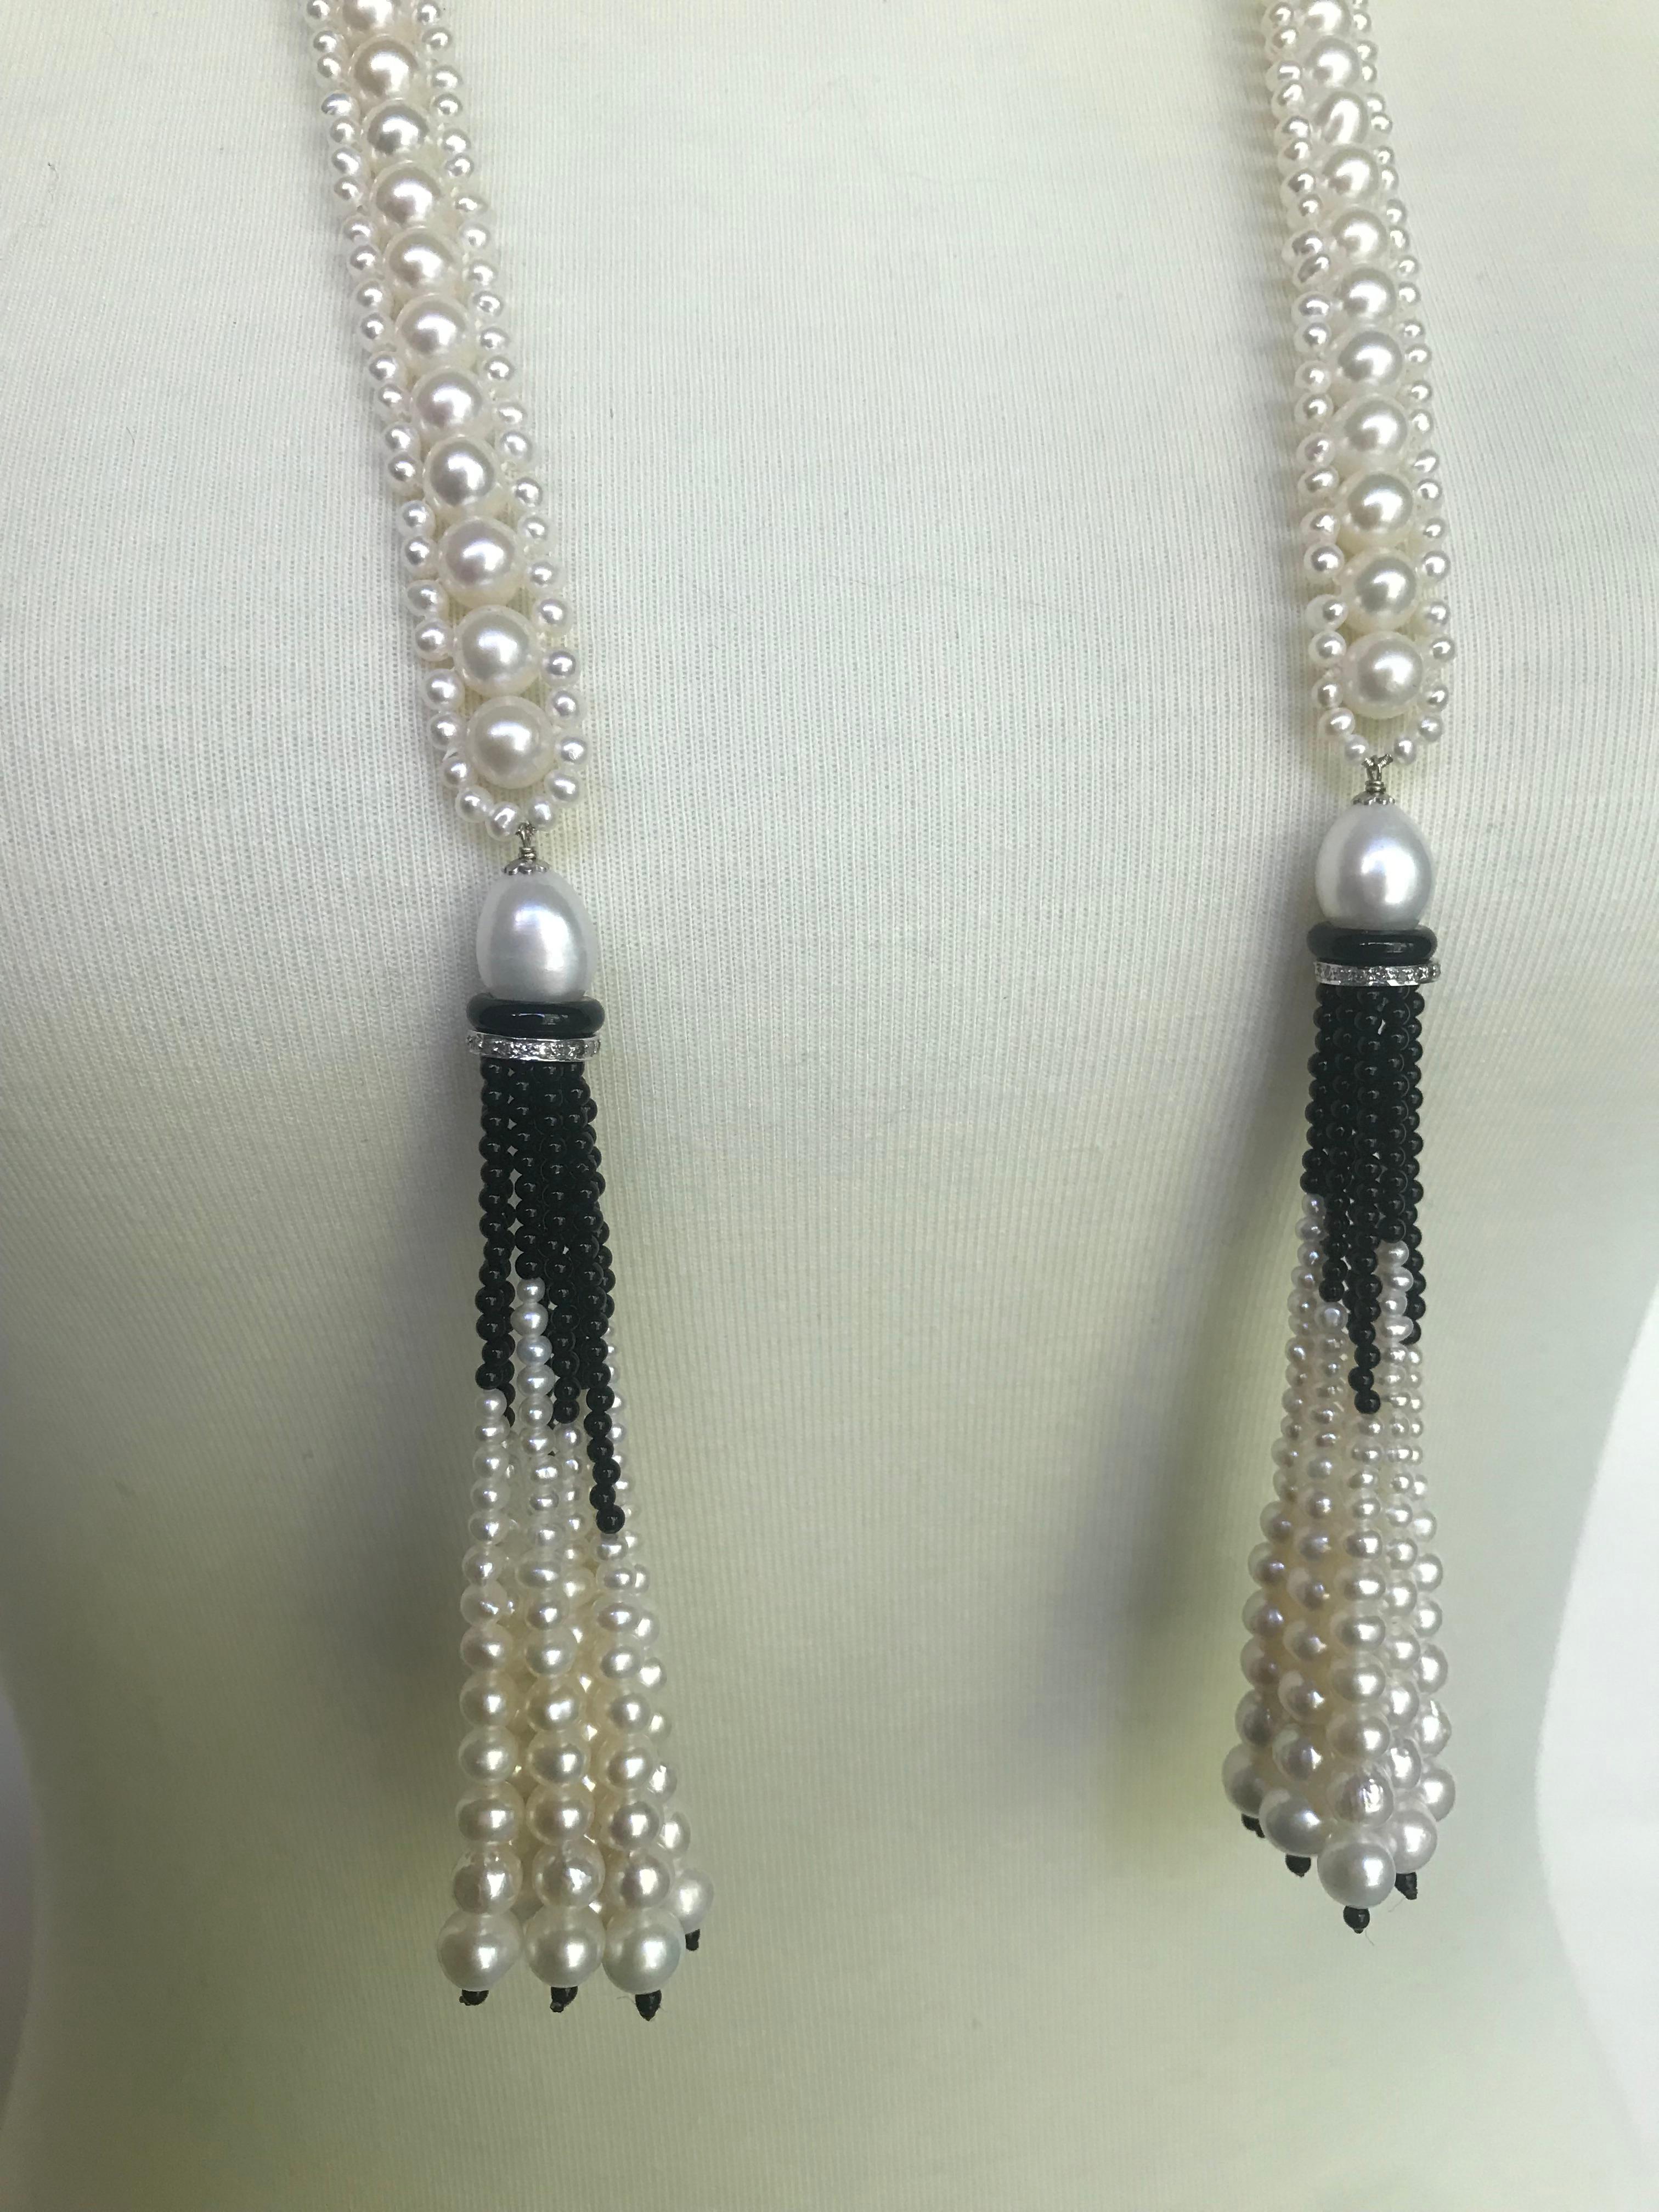 Marina J Woven Pearl Sautoir with Tassels and 14 K White Gold and Onyx beads 4